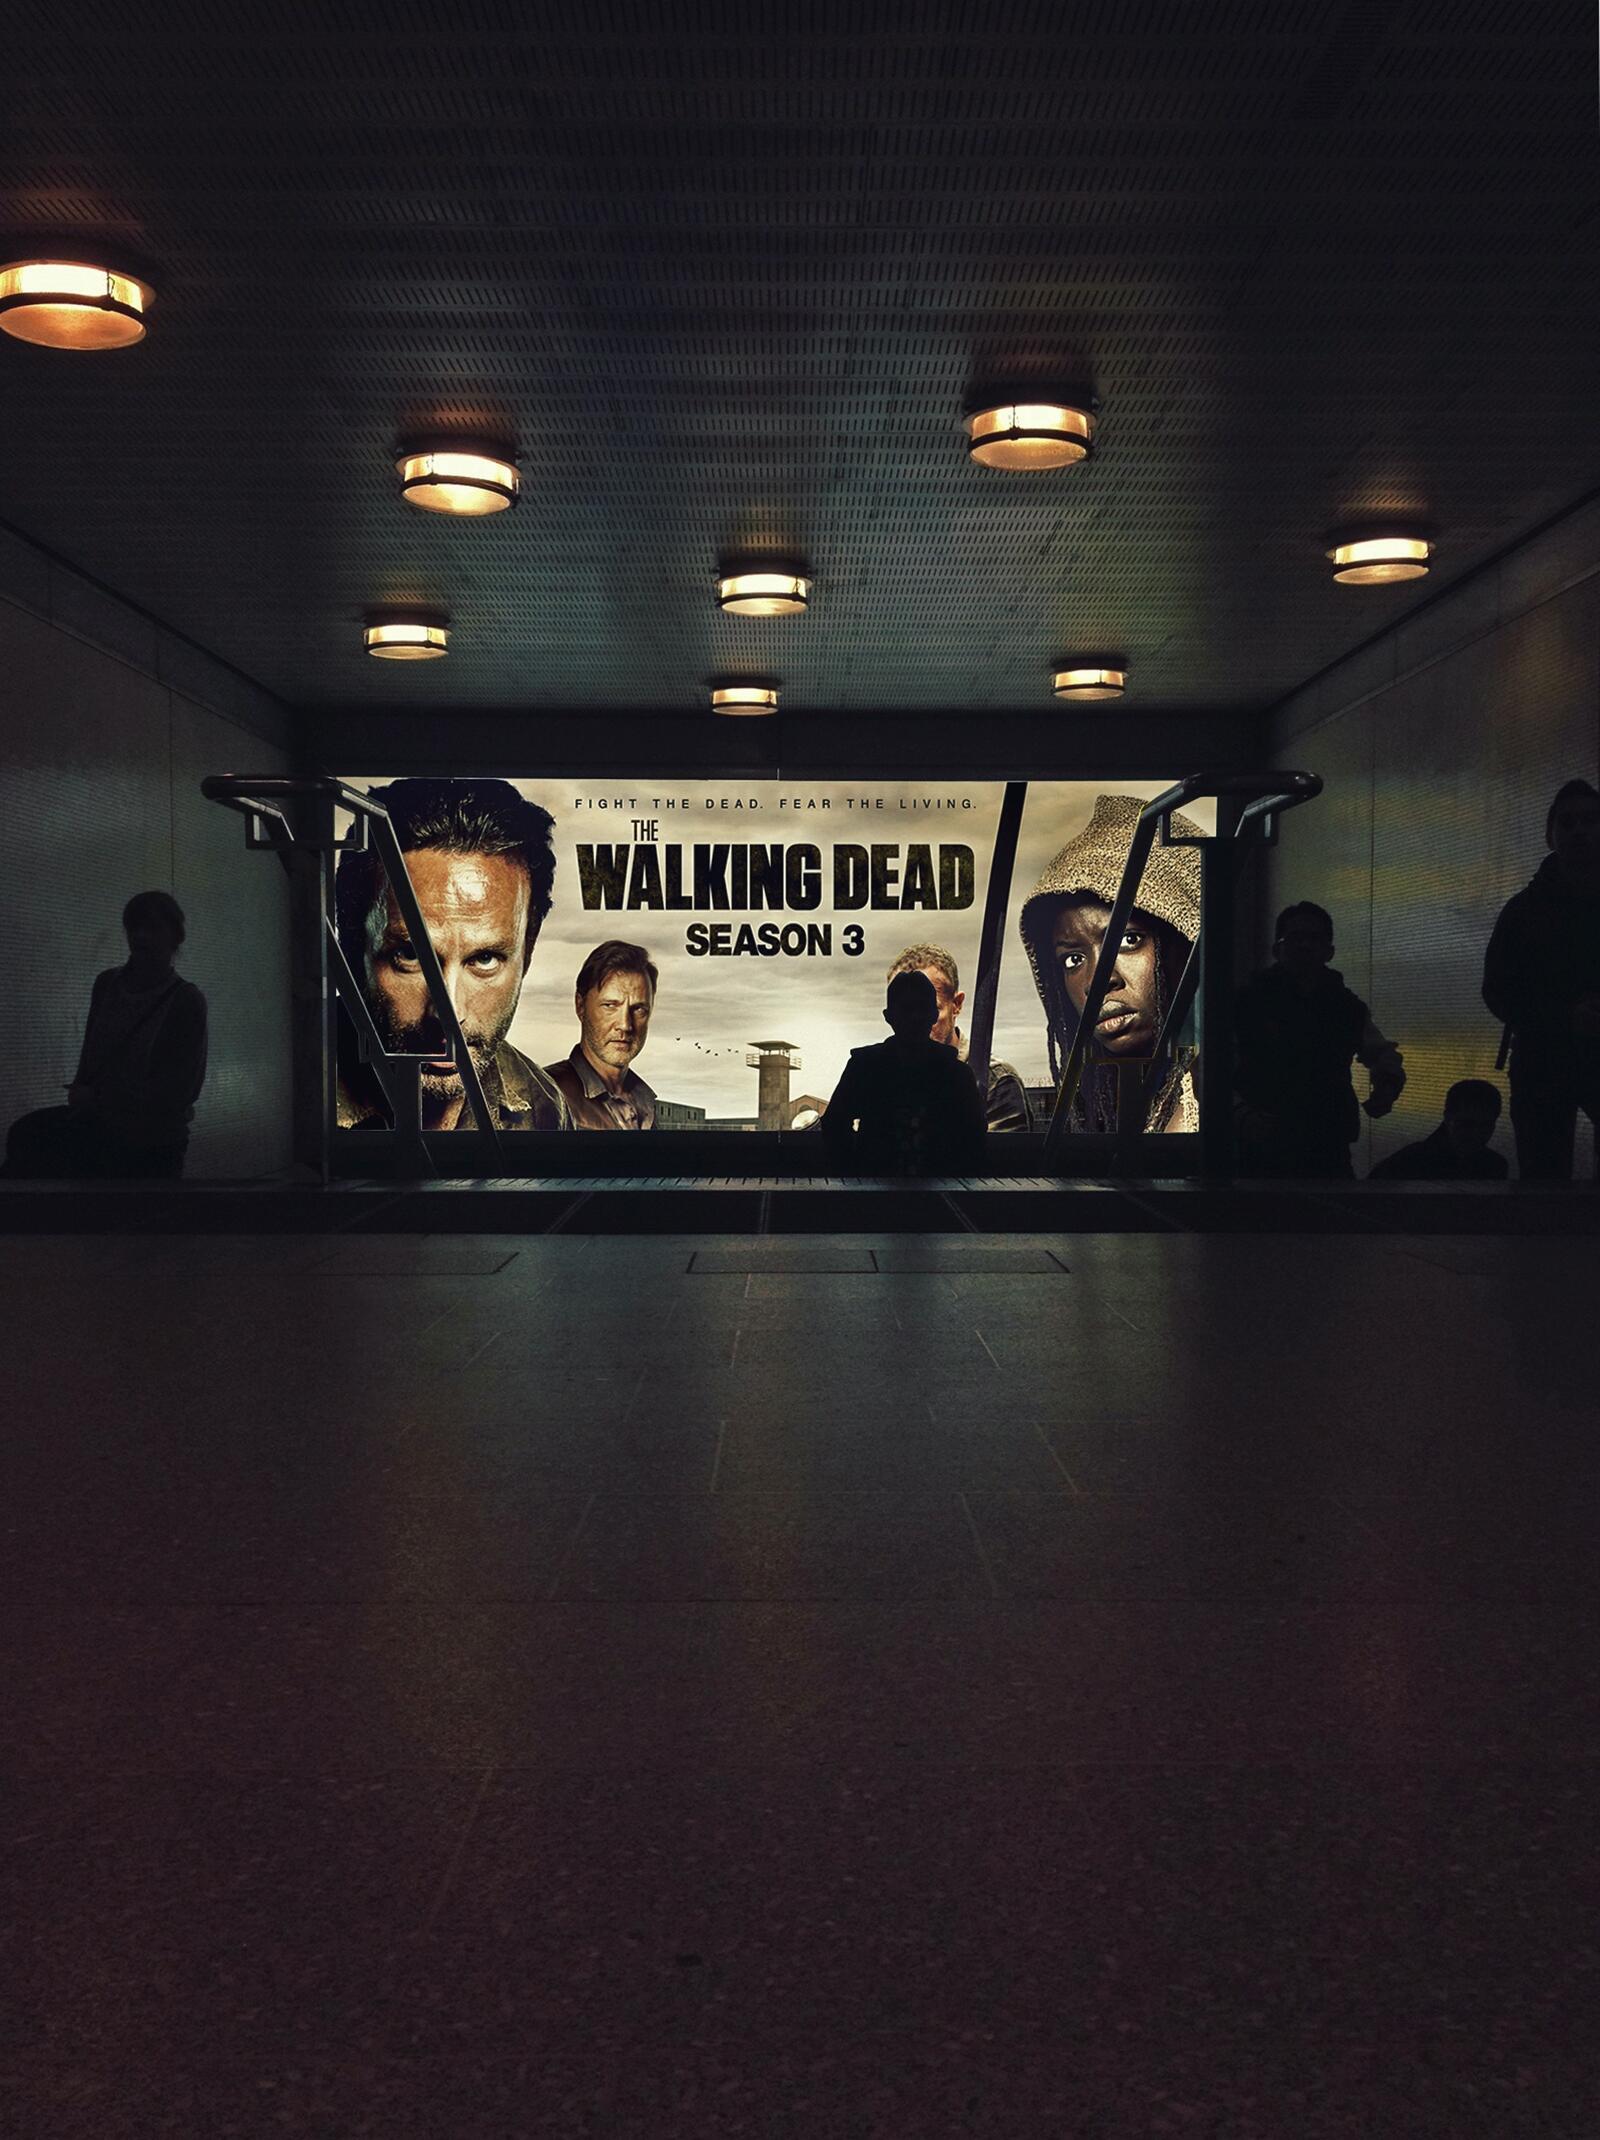 Free photo The Walking Dead on the movie poster.